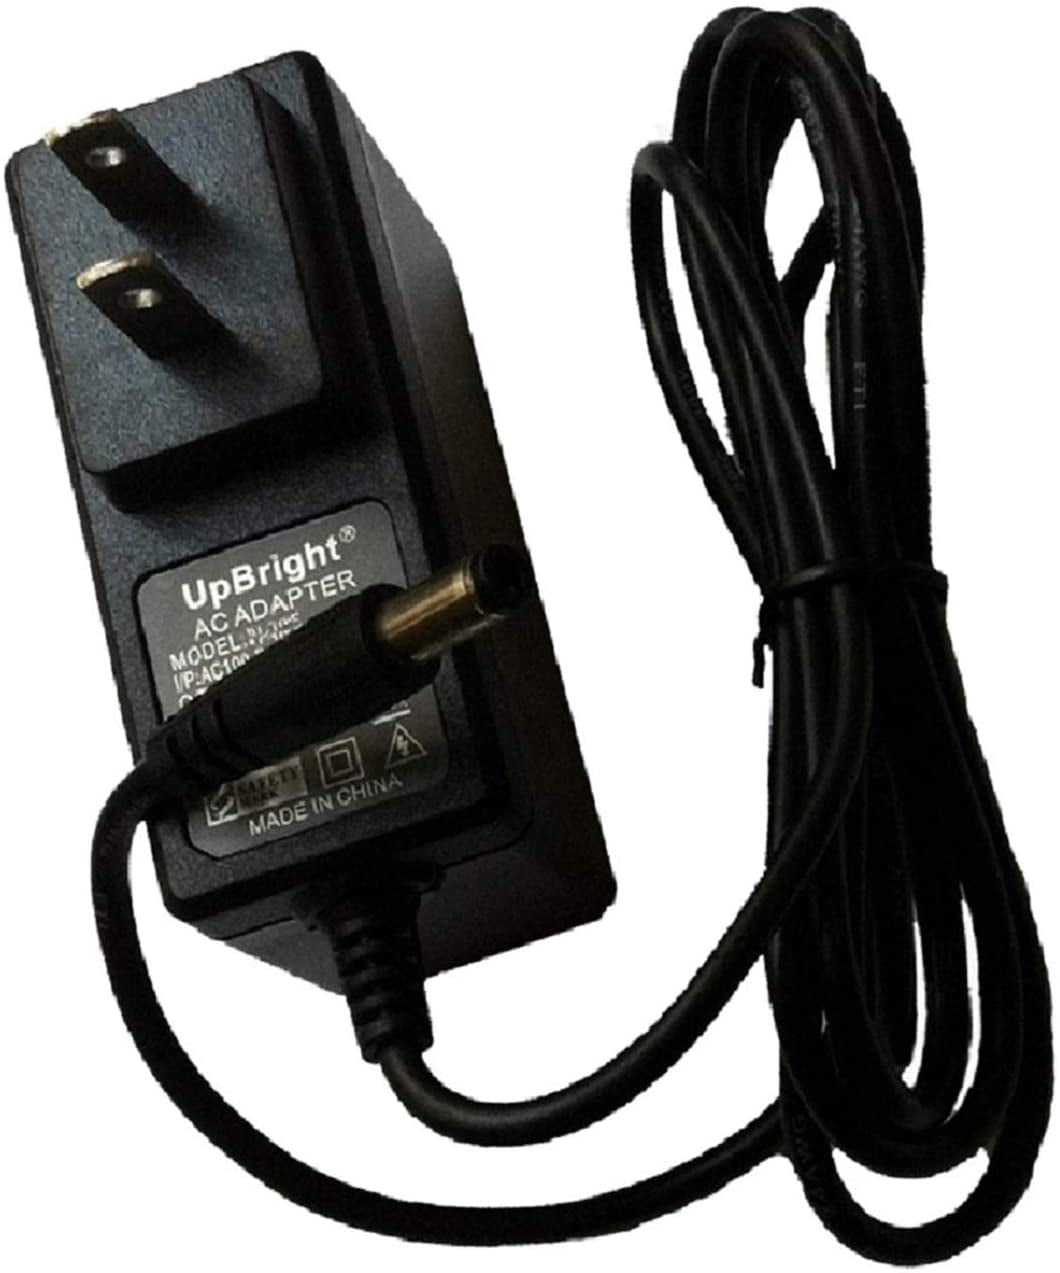 UPBRIGHT Global AC / DC Adapter For Casio Privia PX-720 PX-720C PX-800  PX720 PX720C PX800 Digital Piano Keyboard Power Supply Cord Cable Charger  Mains PSU - Walmart.com